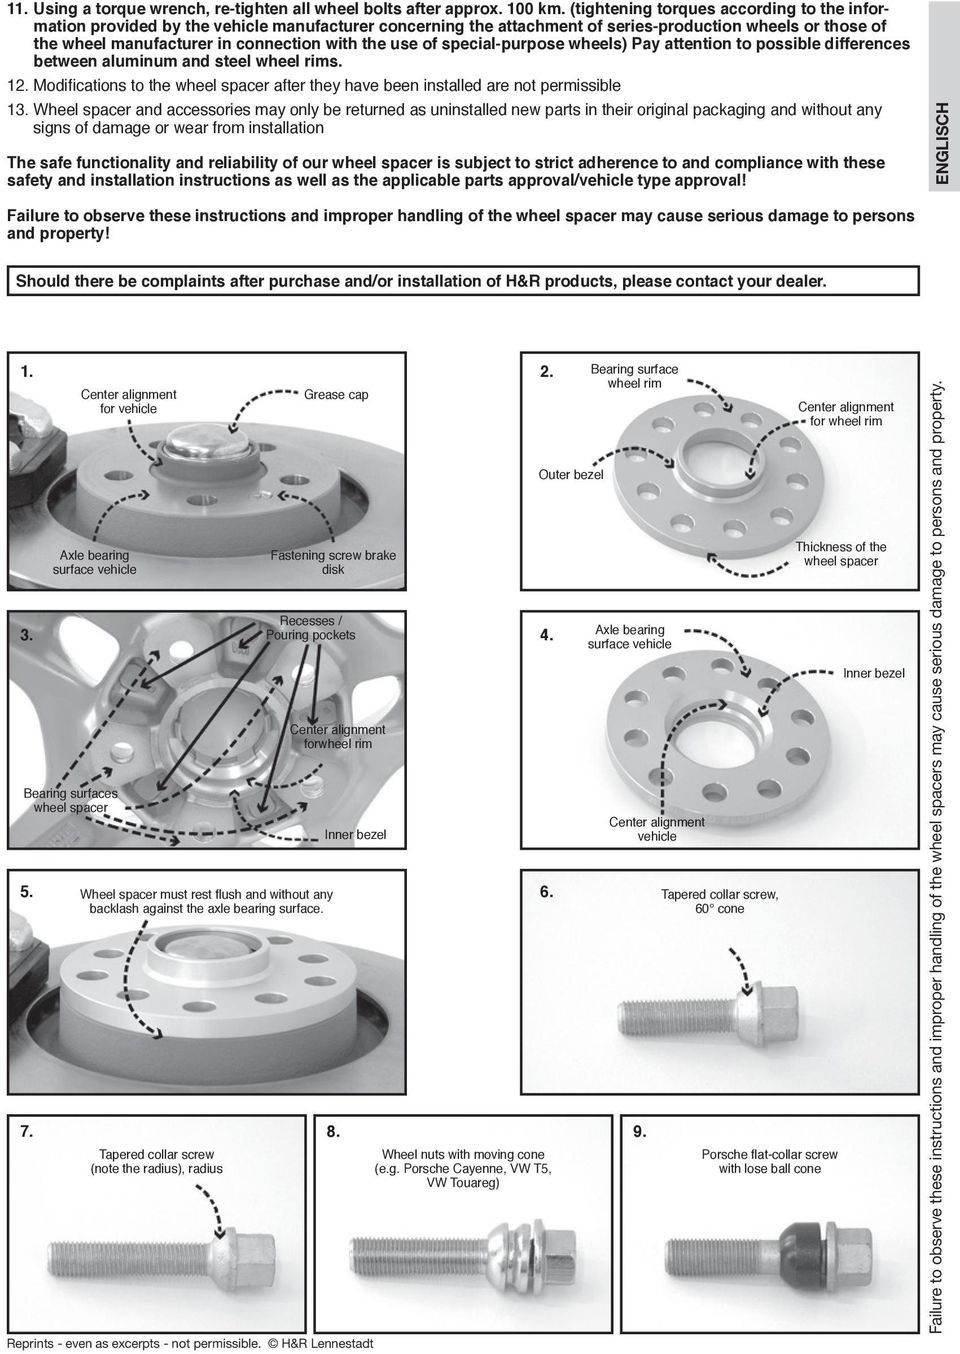 use of special-purpose wheels) Pay attention to possible differences between aluminum and steel wheel rims. 12. Modifications to the wheel spacer after they have been installed are not permissible 13.